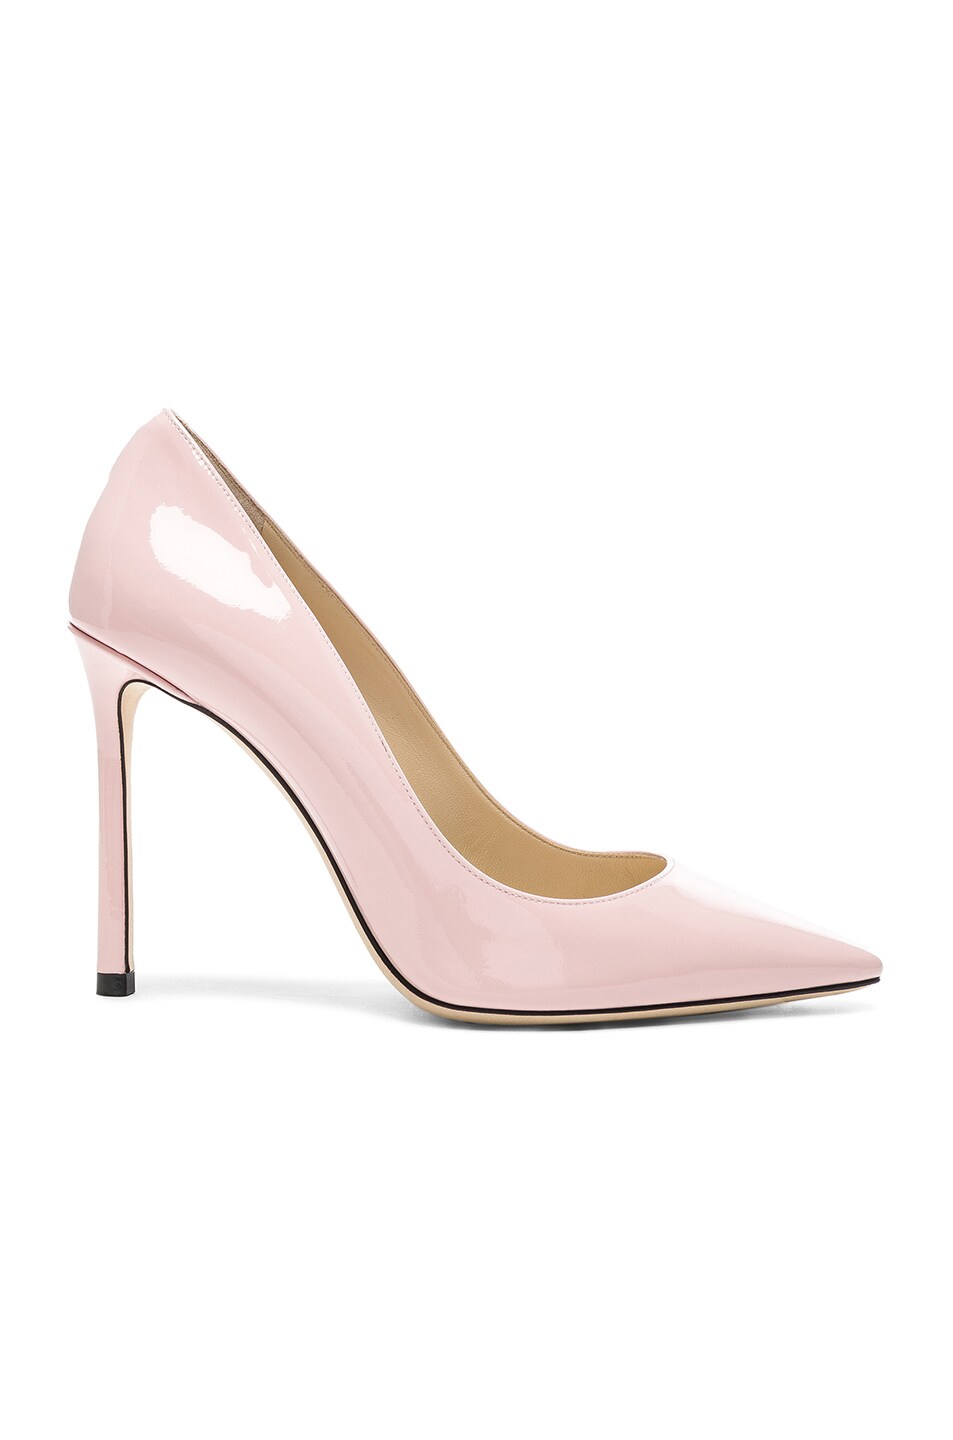 Image 1 of Jimmy Choo Romy 100 Patent Leather Heels in Rosewater